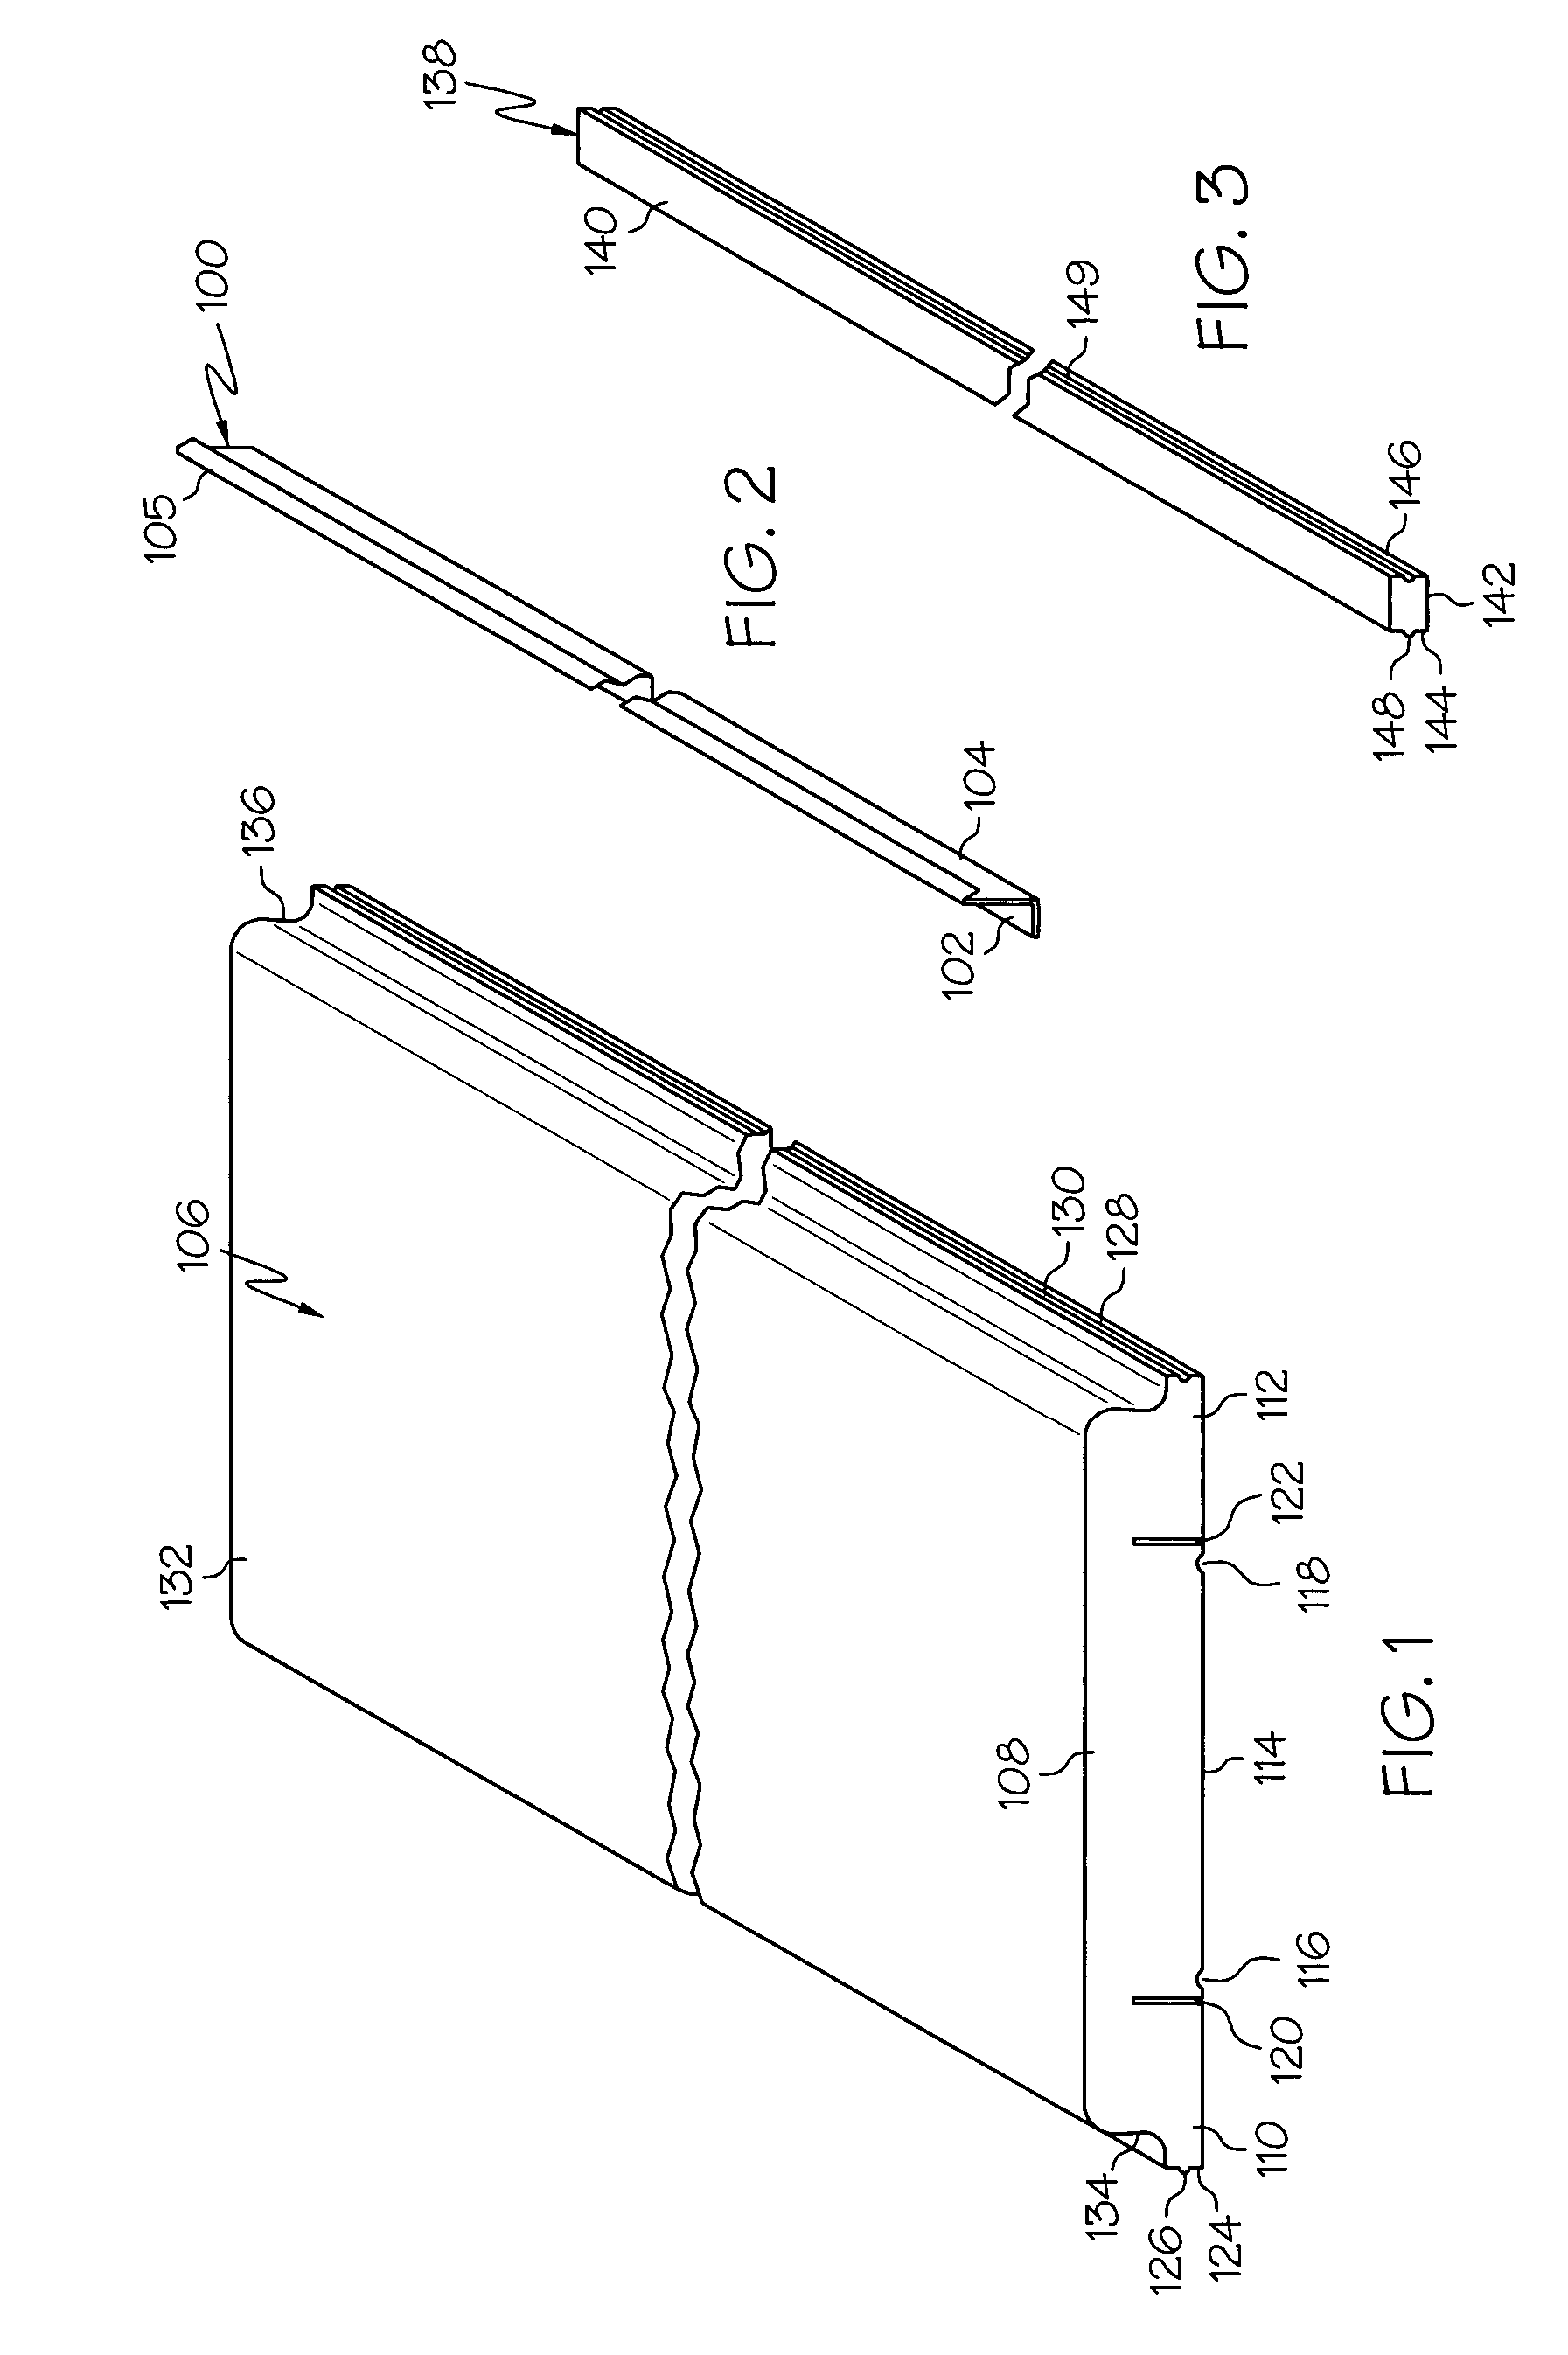 Method and apparatus for forming cast wall panels